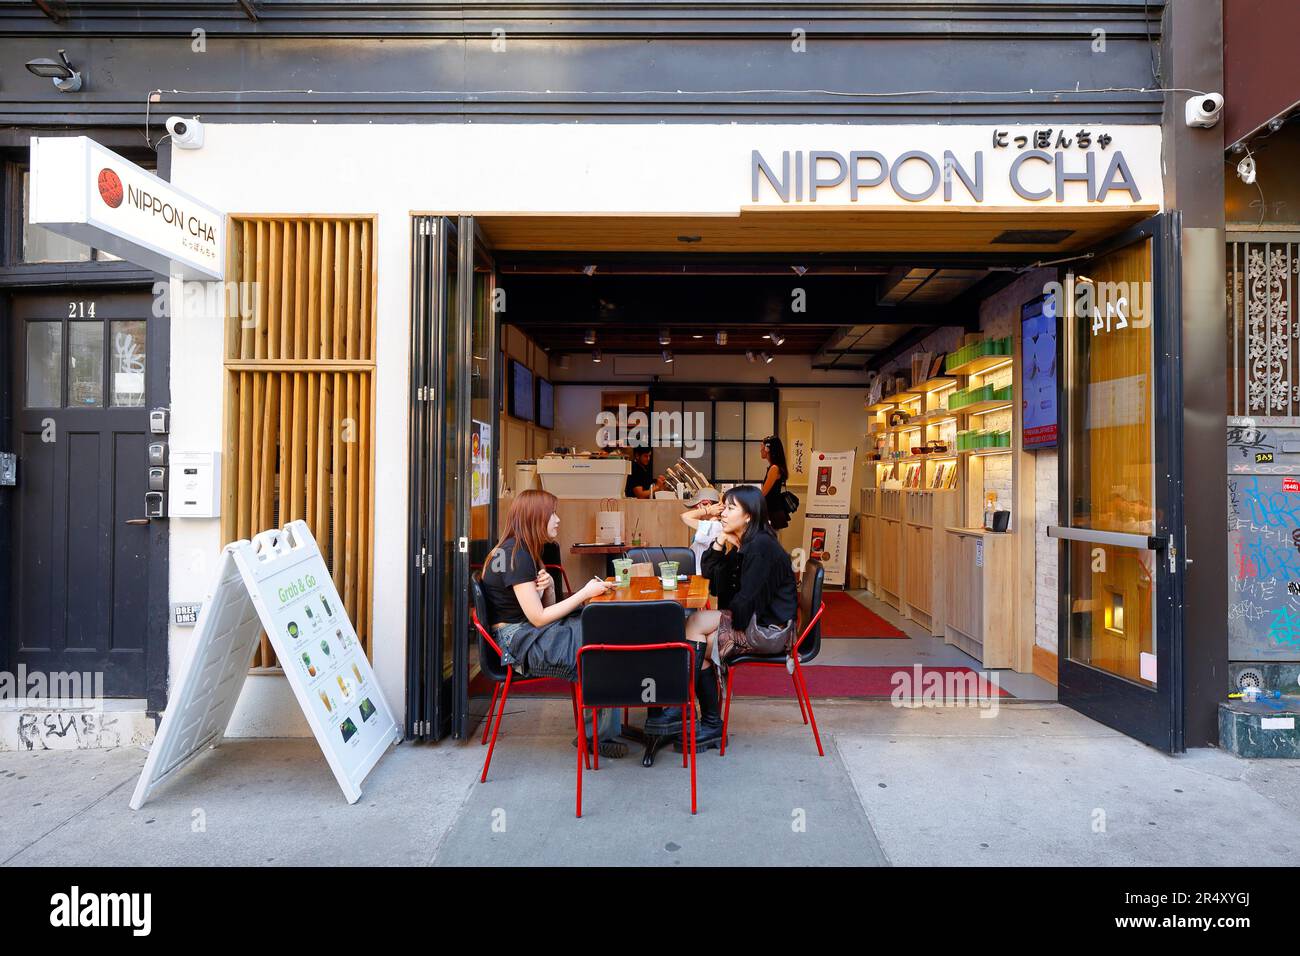 Nippon Cha にっほんちゃ, 214 Bedford Ave, Brooklyn, NYC storefront of a Japanese tea store and cafe in the Wiliamsburg neighborhood, New York. Stock Photo